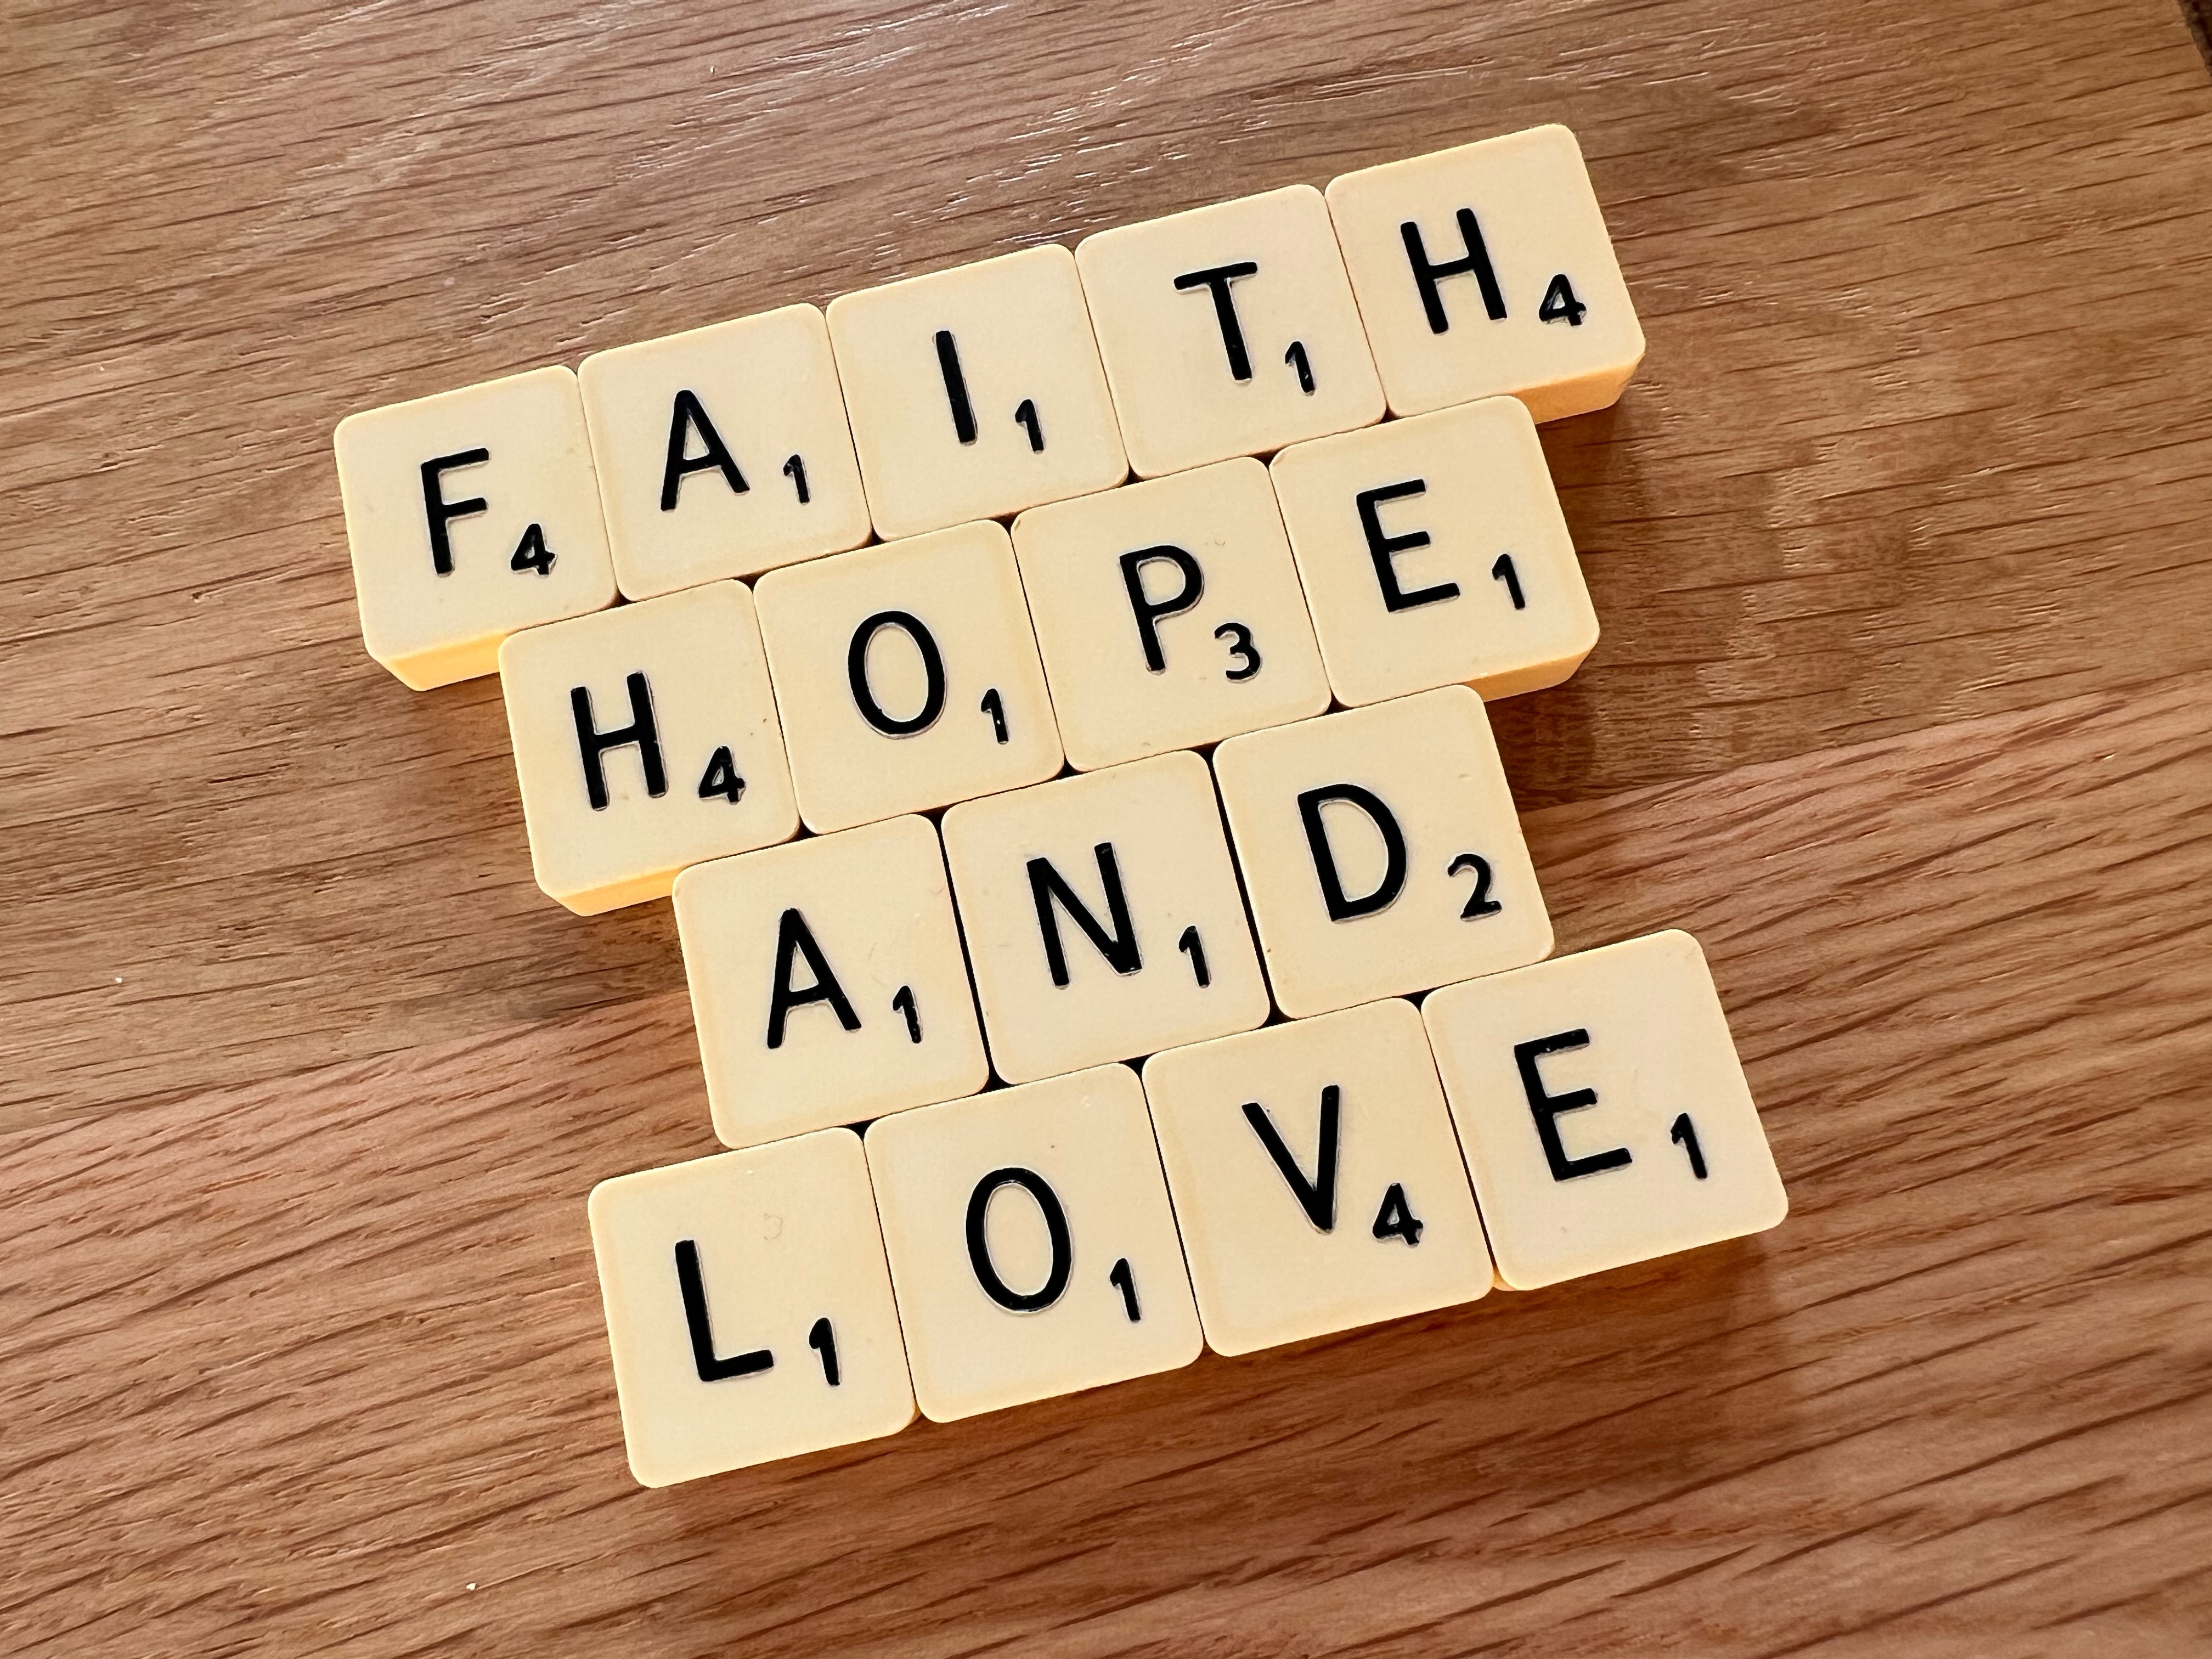 Faith, Hope and Love spelt out with scrabble letters